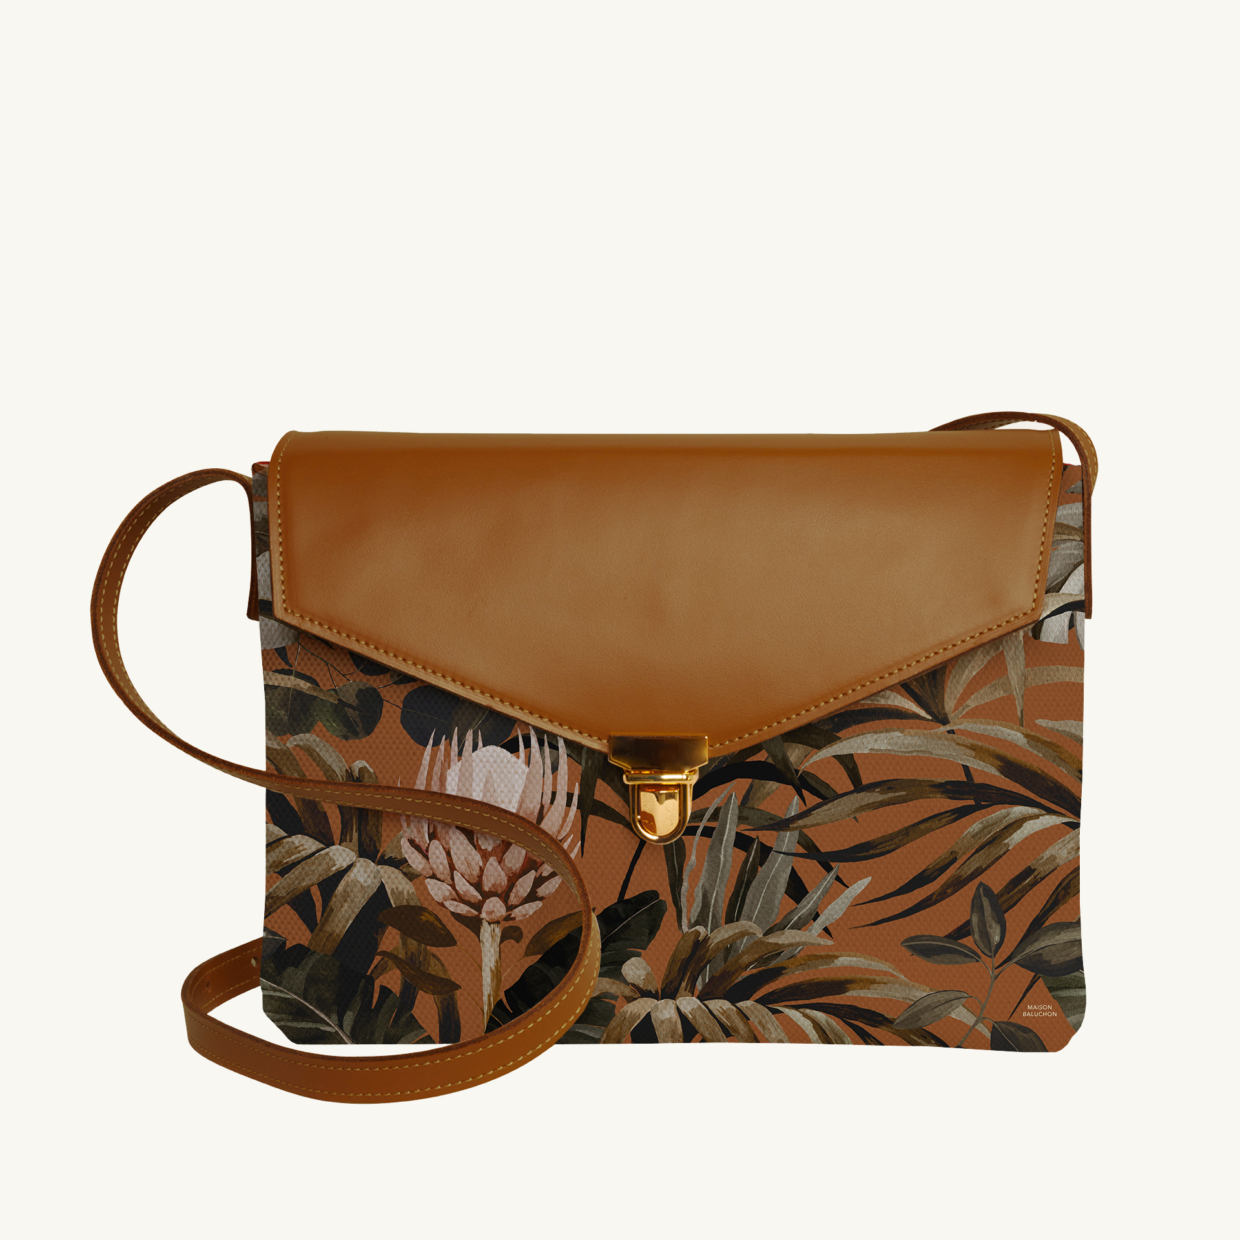 Purse Tropical N°16 - Camel leather